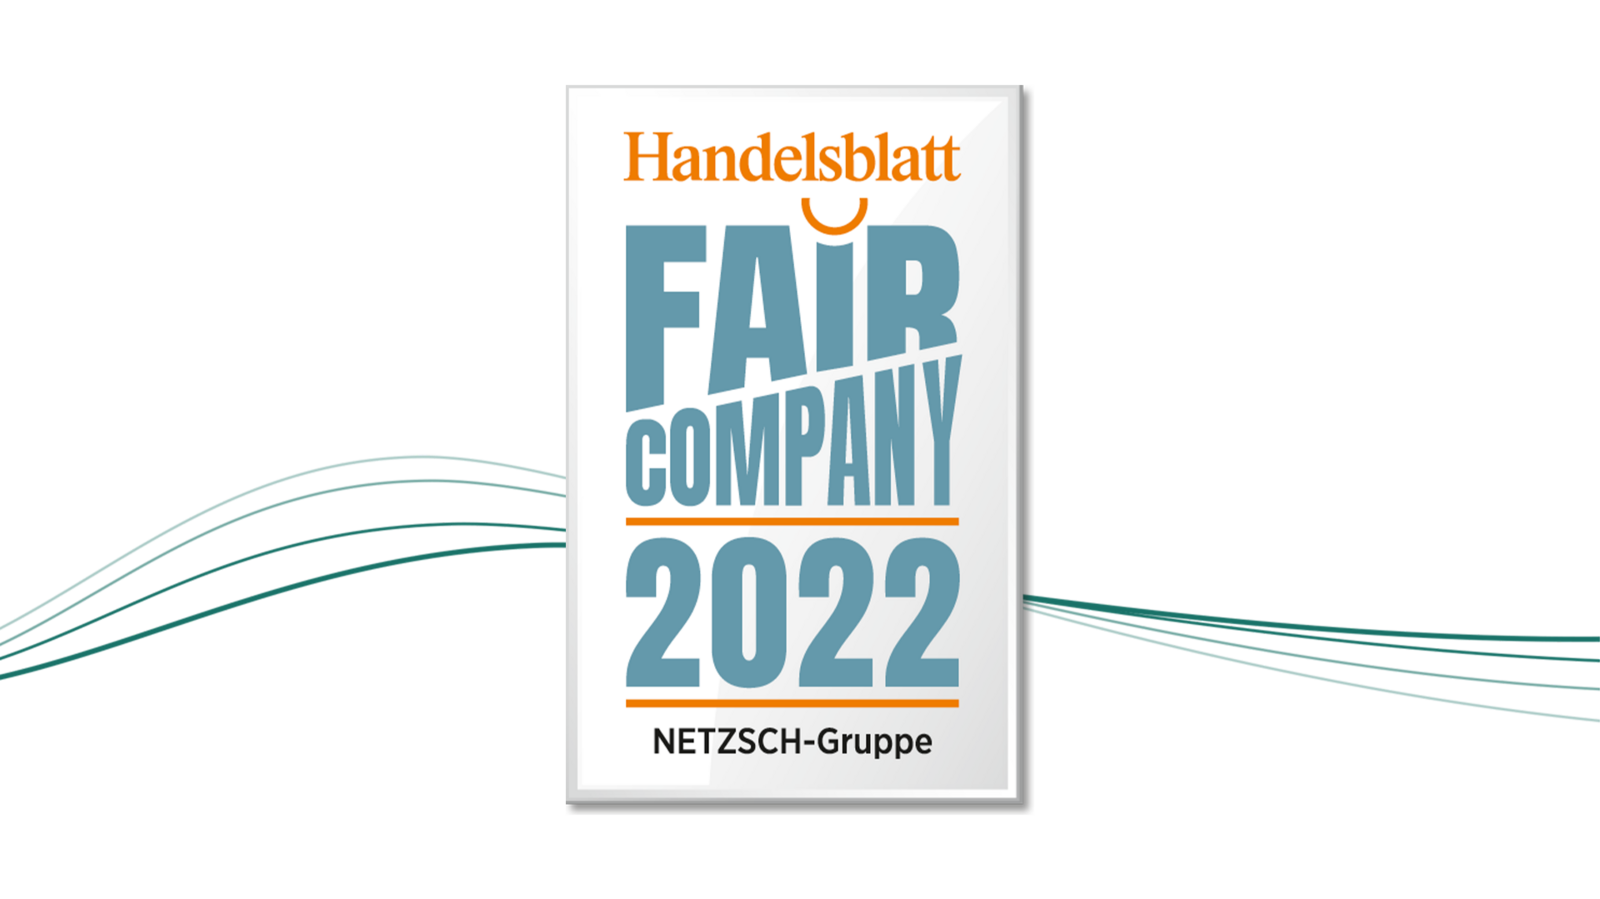 NETZSCH Receives “Fair Company” Award for the Eleventh Time